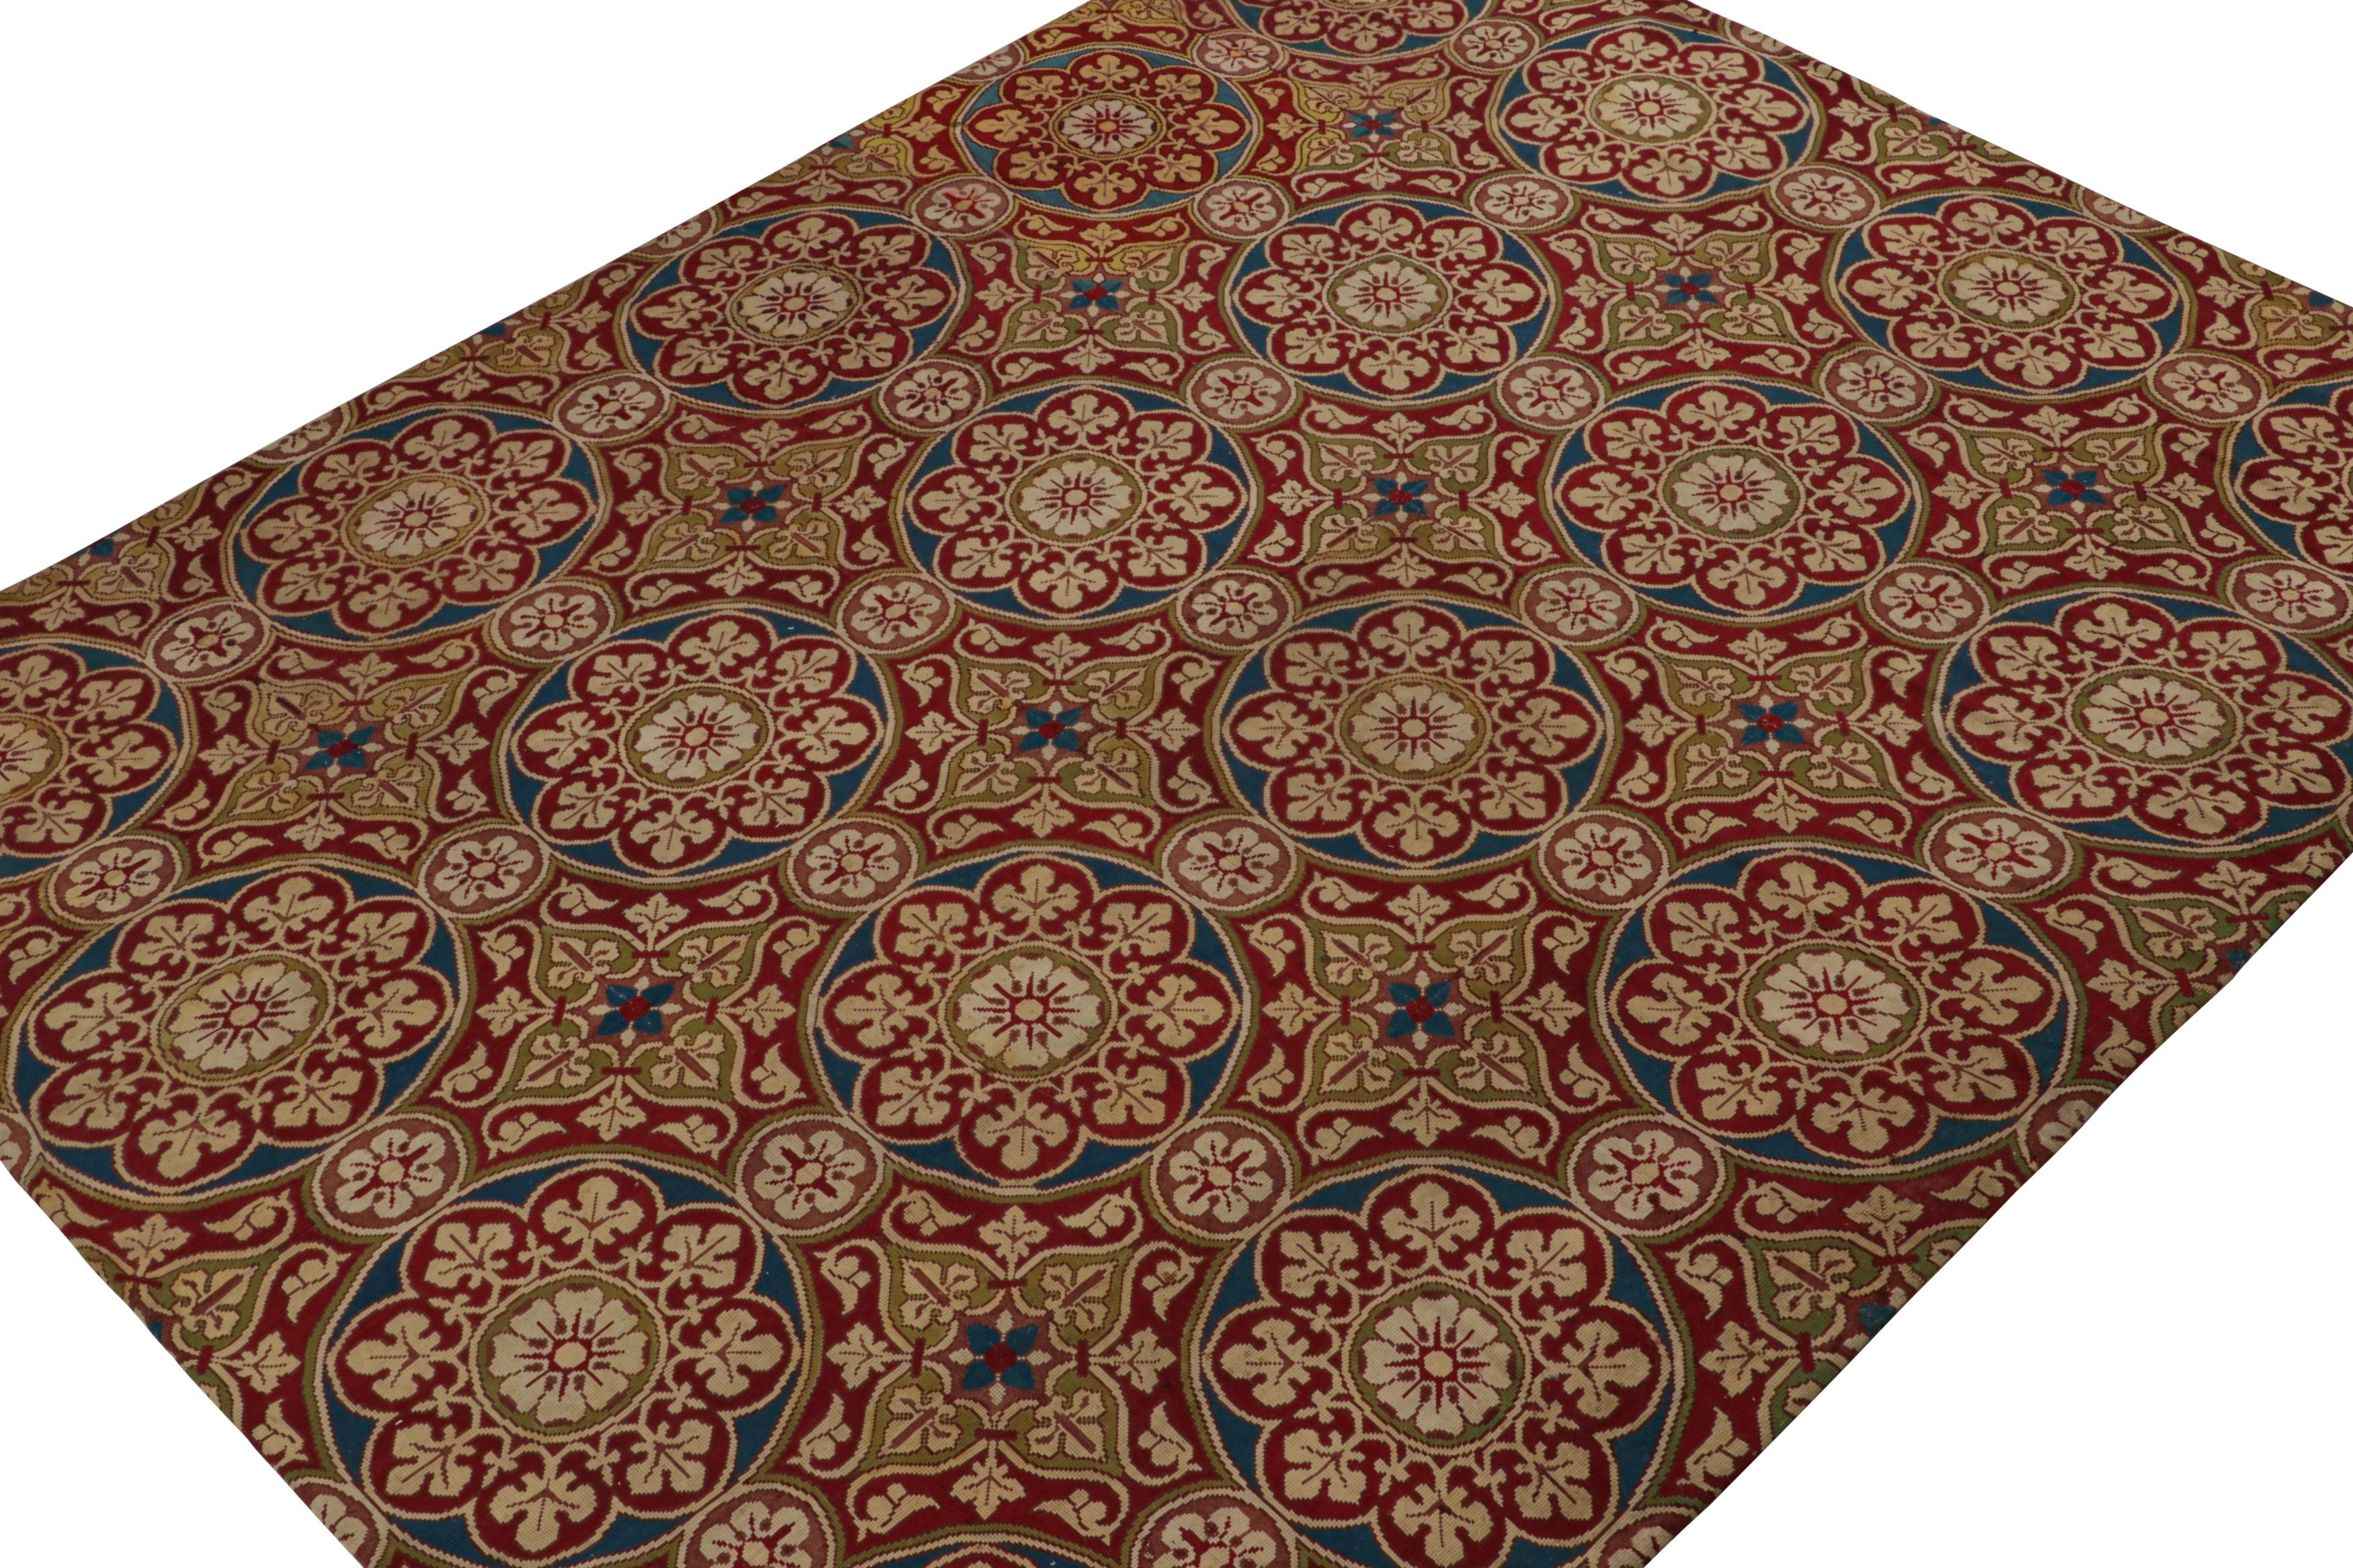 Handwoven in wool and originating from France circa 1920-1930, this 9x11 antique French Needlepoint rug features a red field and floral medallions in navy blue, chartreuse green and beige notes.

On the design: 

Needlepoints represent an intricate